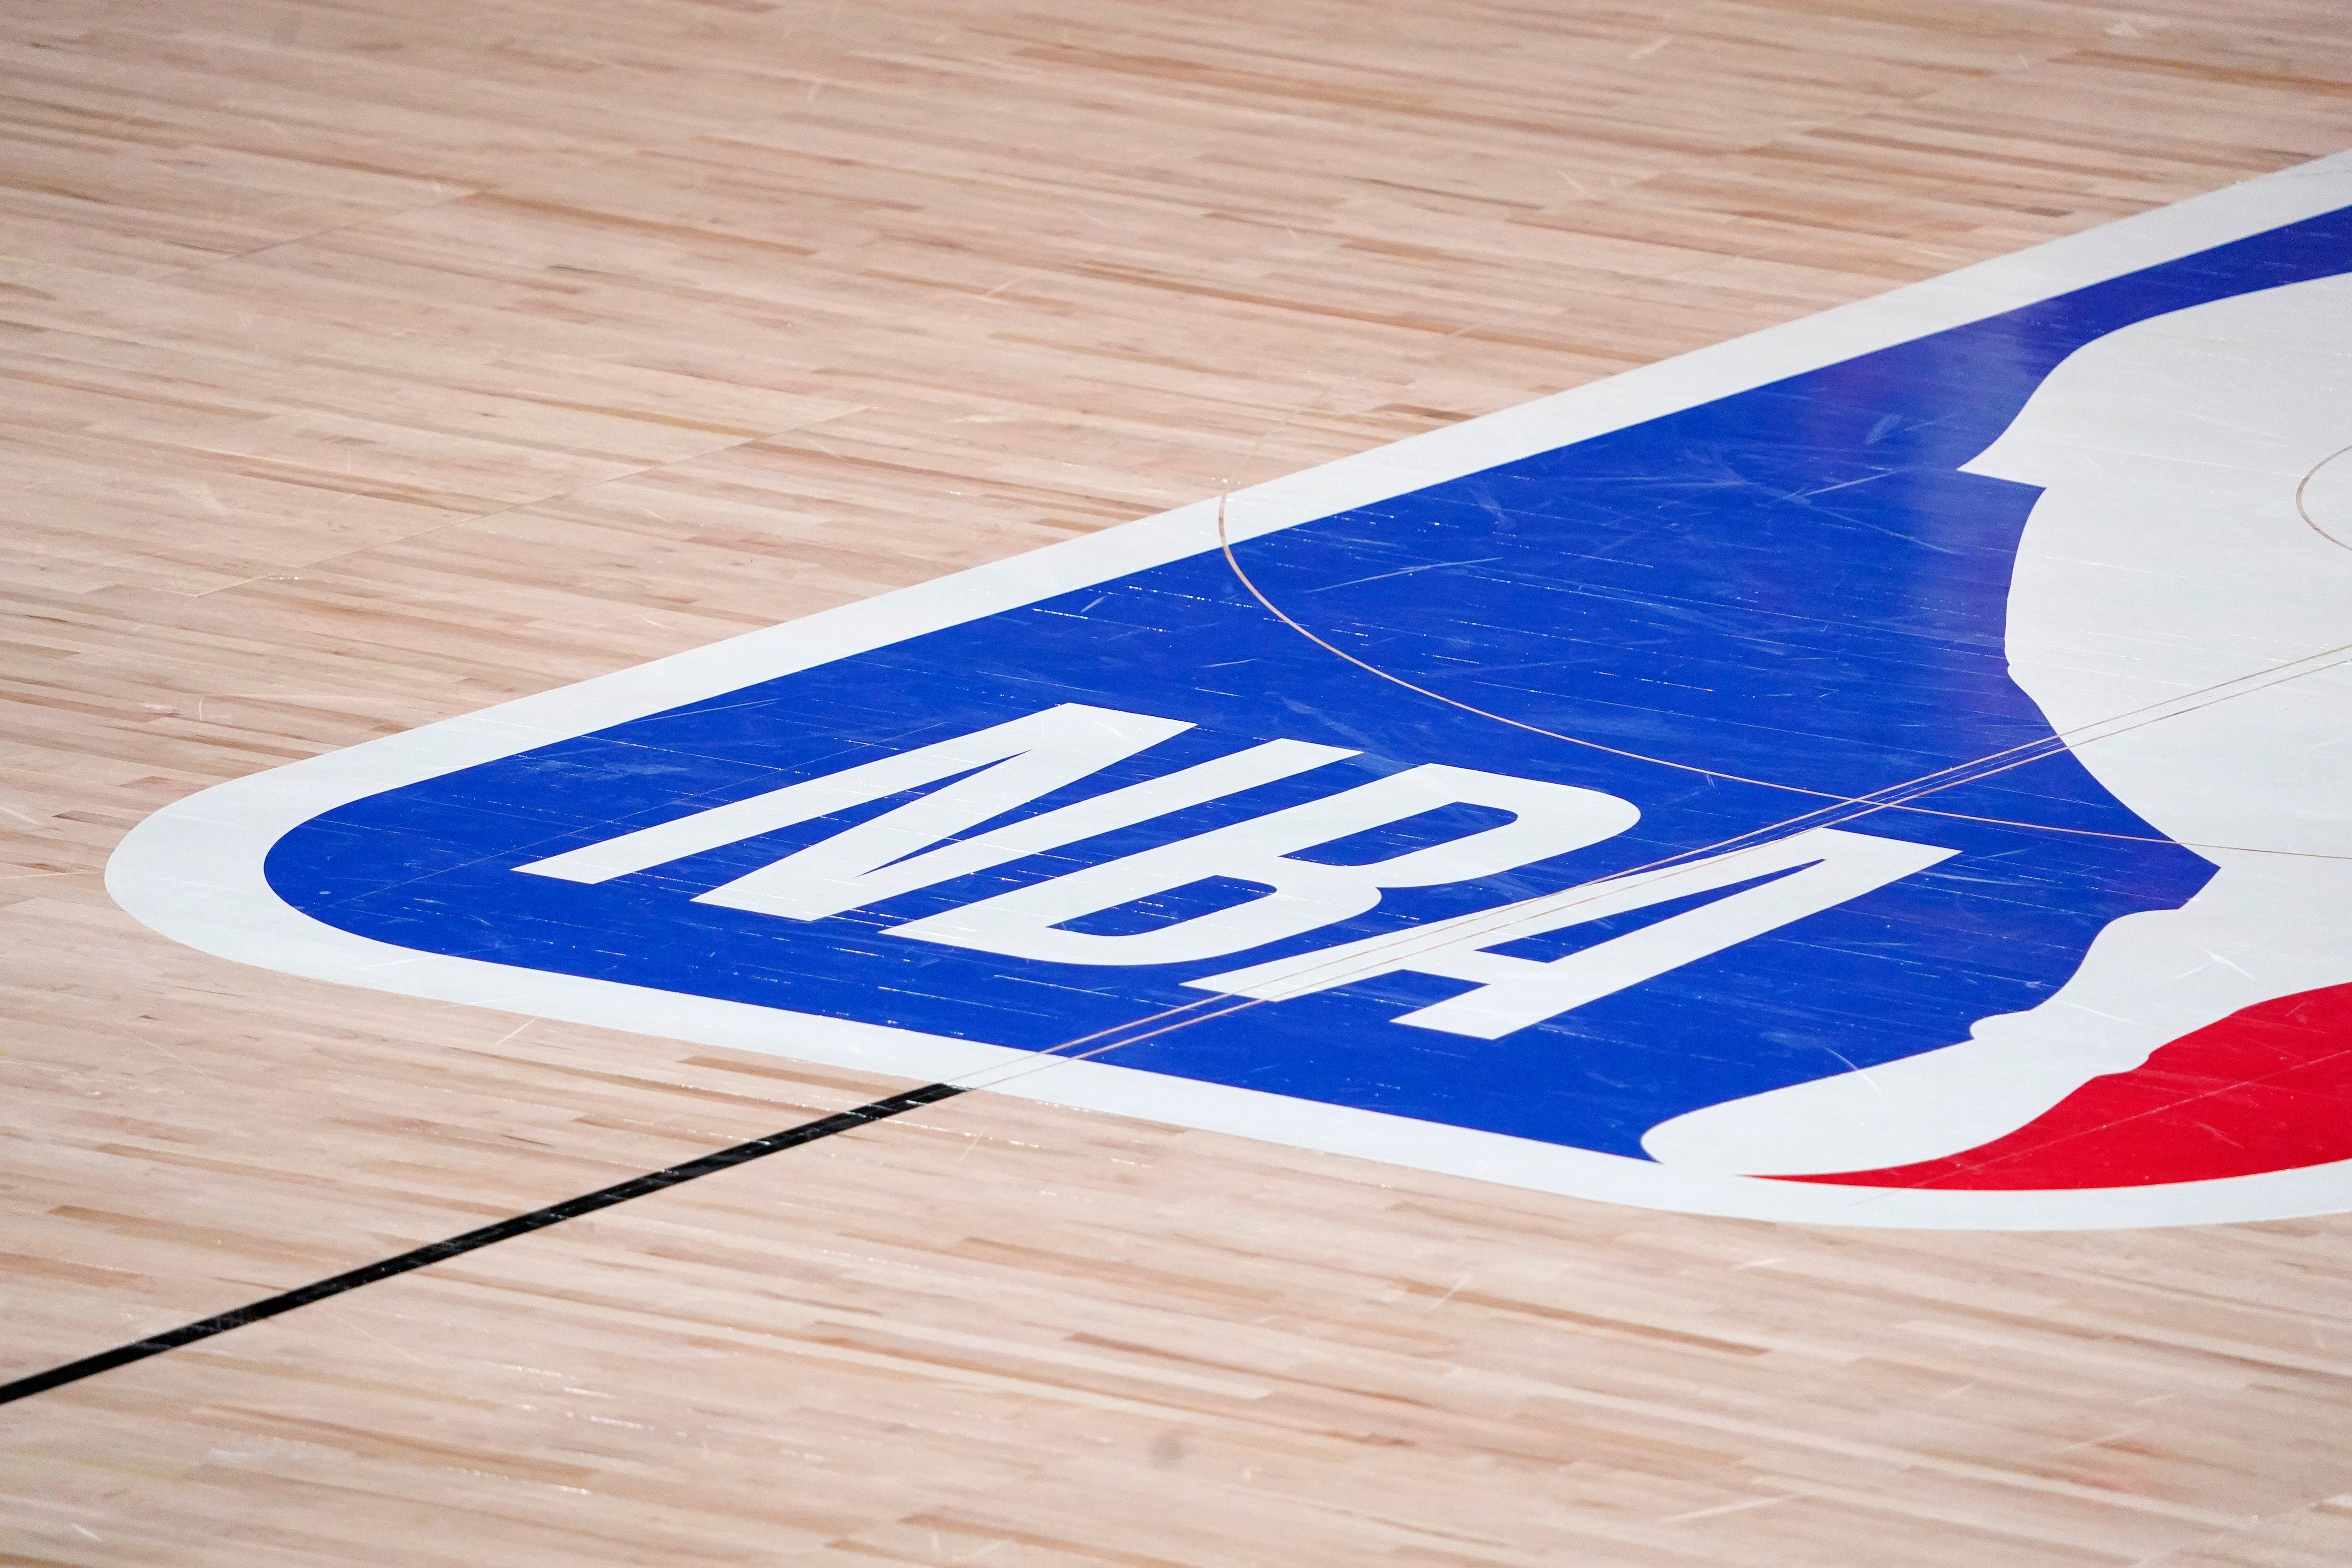 NBA weighs major overhaul to limit team spending in new collective bargaining agreement